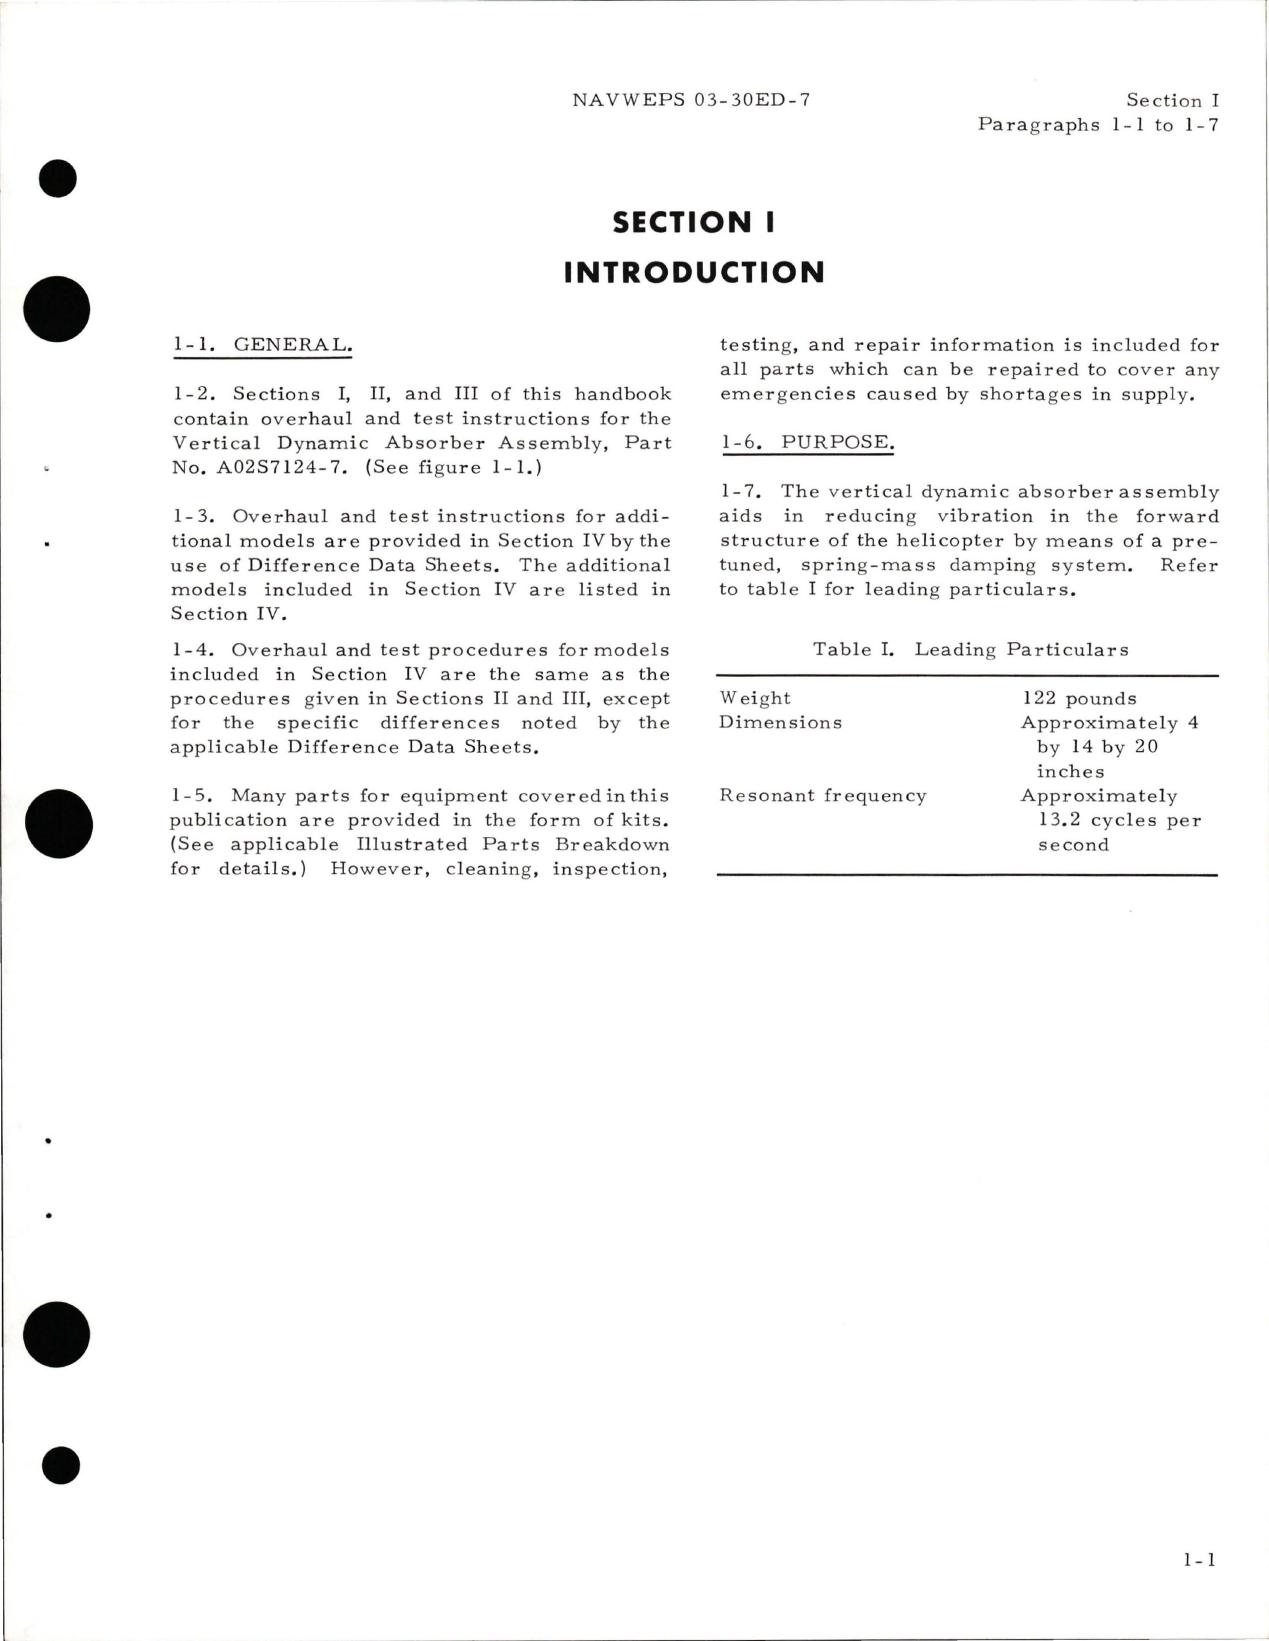 Sample page 5 from AirCorps Library document: Overhaul Instructions for Vertical Dynamic Absorber Assembly - Part A02S7124-7 and A02SA7124-9